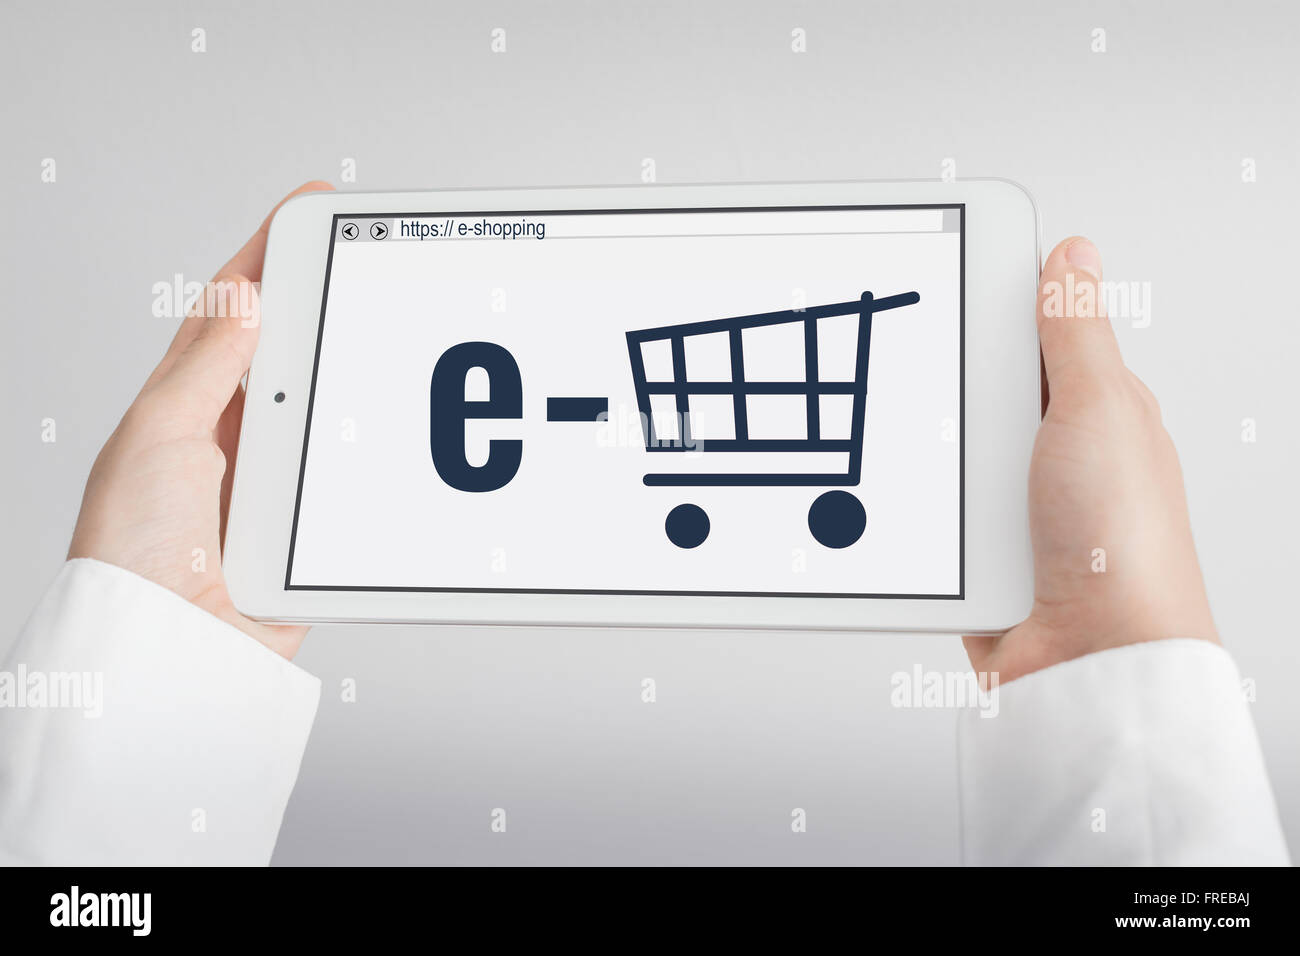 E-commerce concept with tablet pc Stock Photo